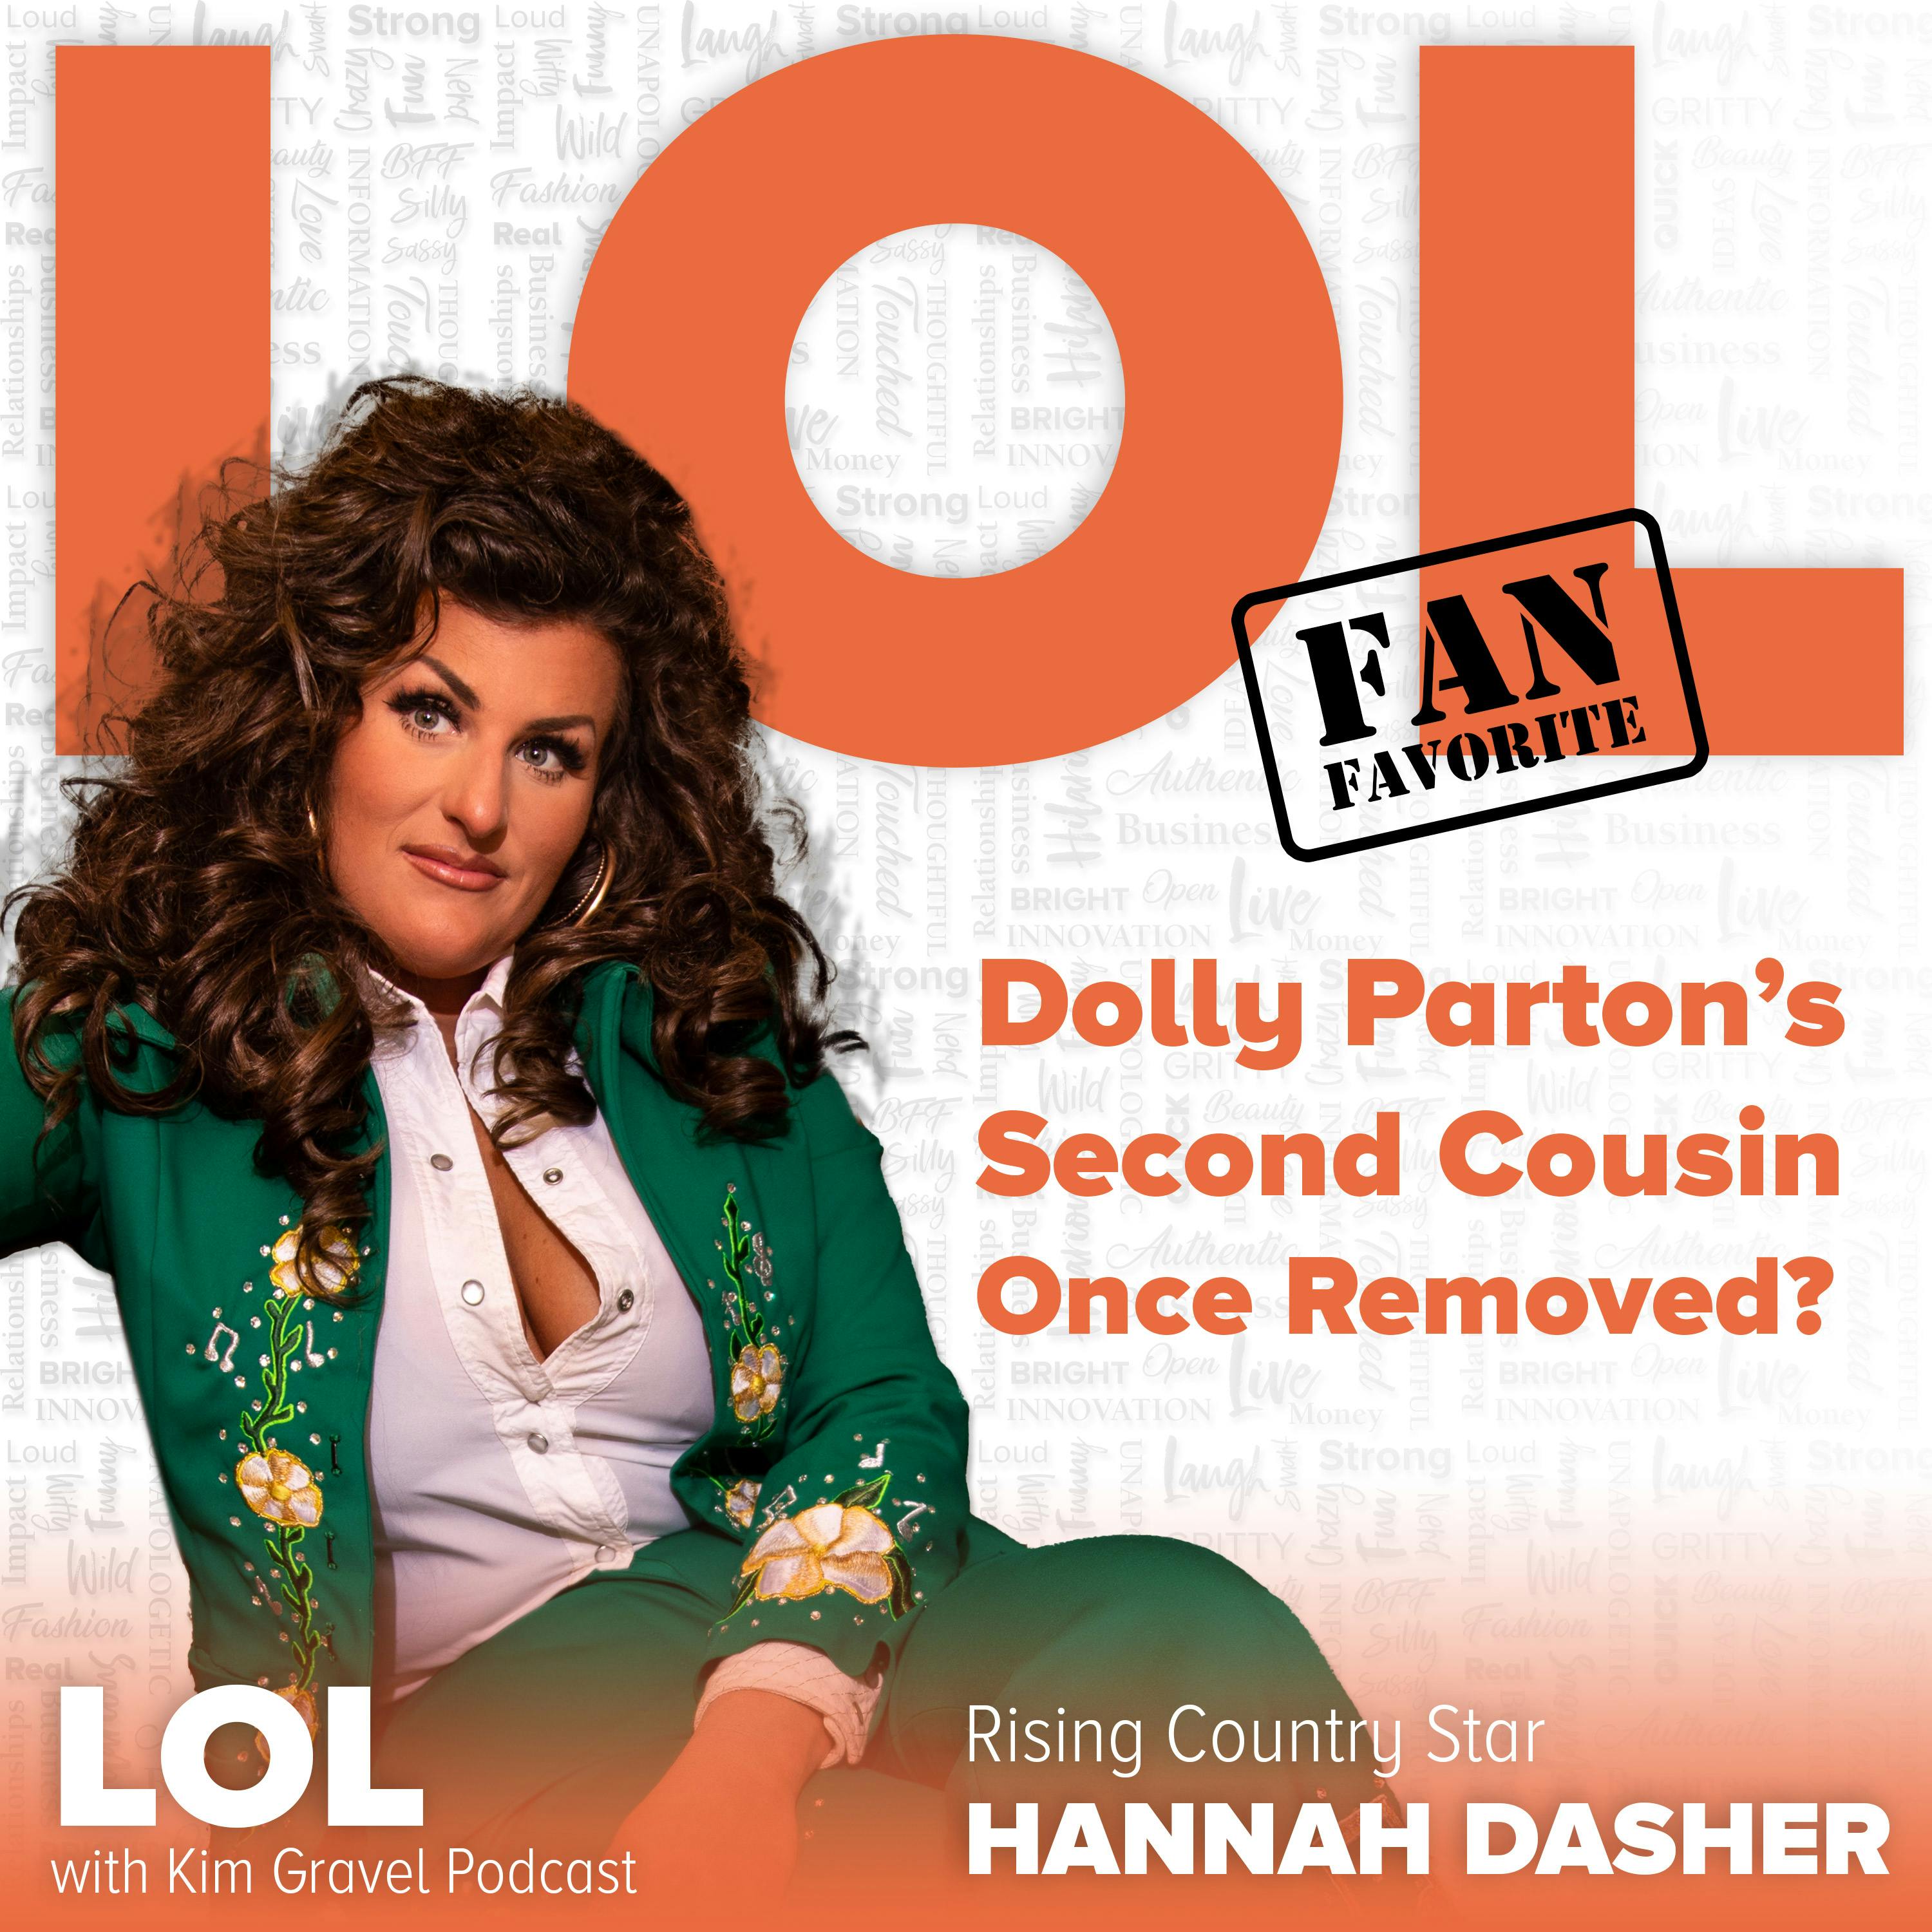 Fan Favorite! Hannah Dasher could be Dolly Parton’s Second Cousin Once Removed? Image